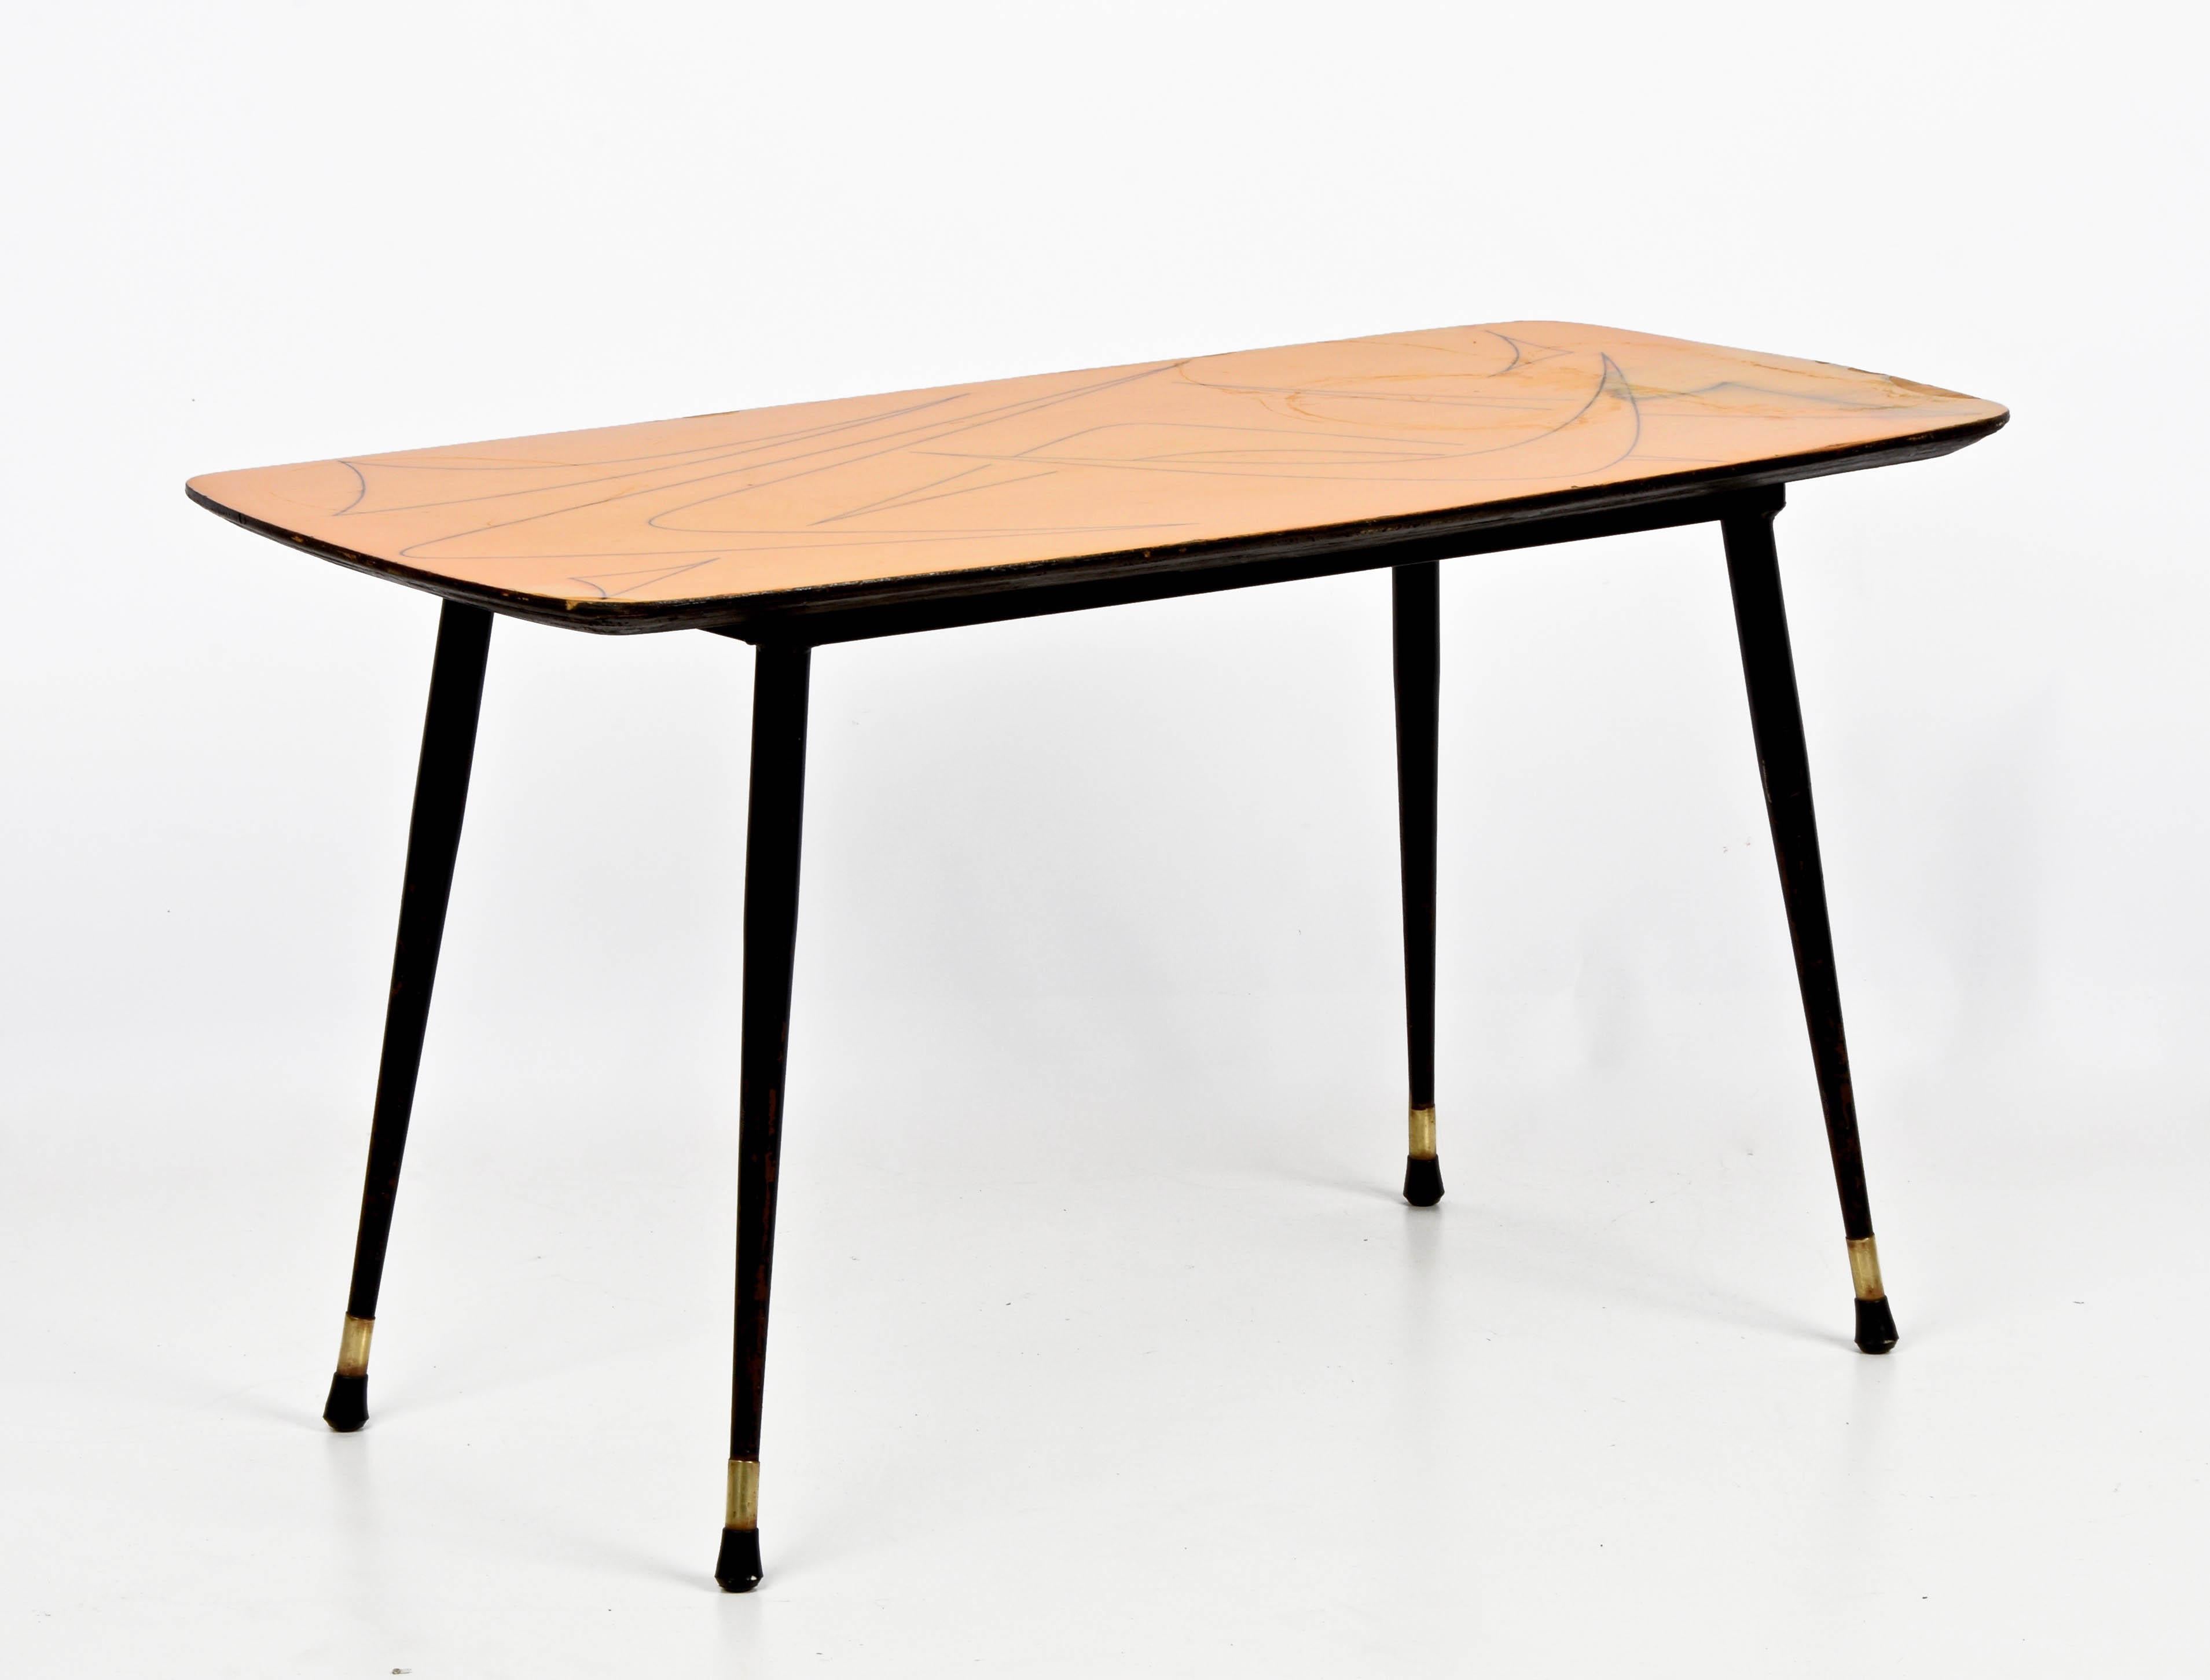 Midcentury Italian Painted Wood, Brass and Black Metal Coffee Table, 1950s For Sale 10